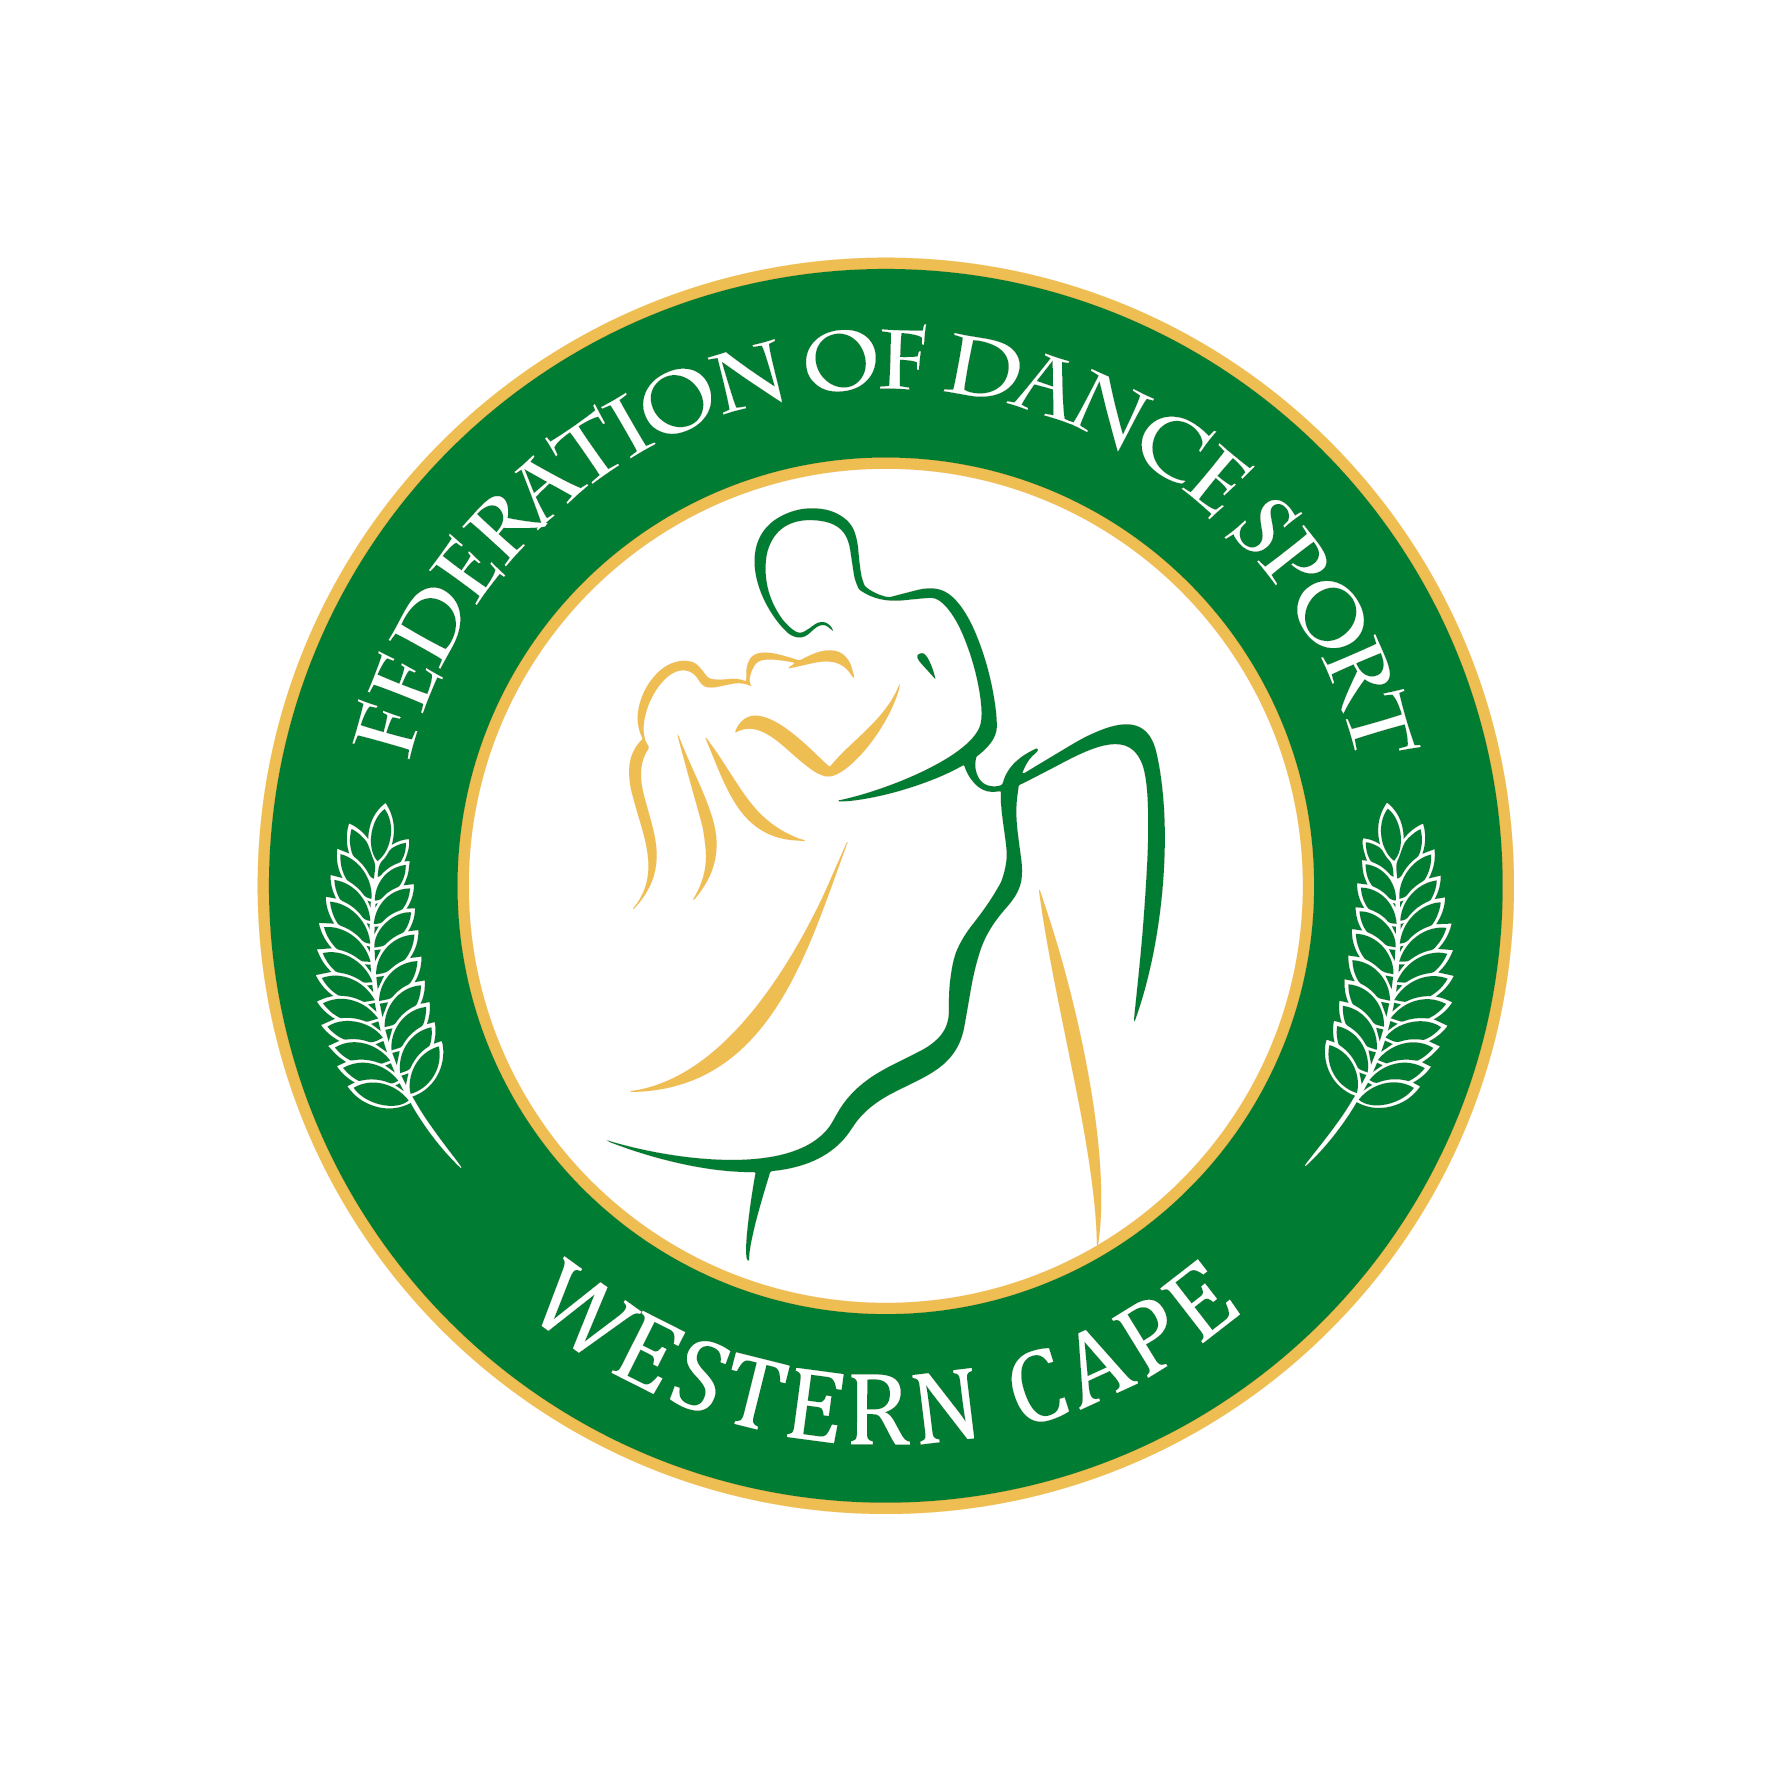 Western Dance Png Transparent PNG - 443x579 - Free Download on NicePNG